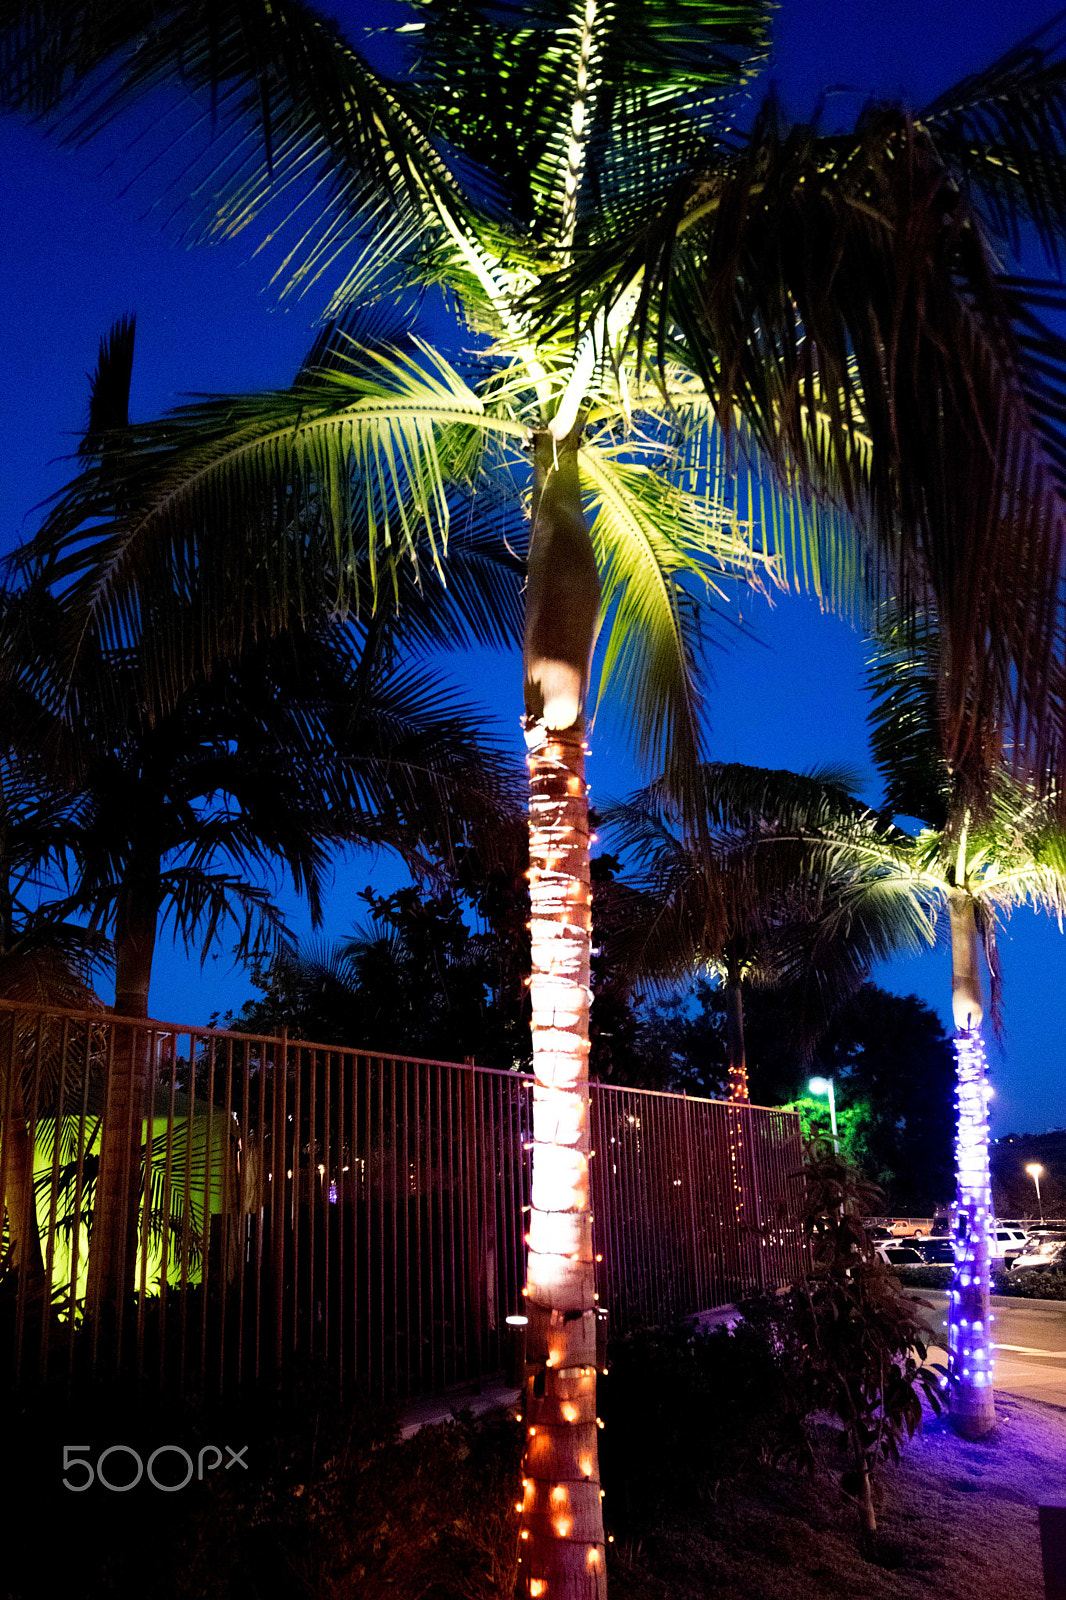 Nikon D5300 + Tokina AT-X 11-20 F2.8 PRO DX (AF 11-20mm f/2.8) sample photo. Glowing palm photography